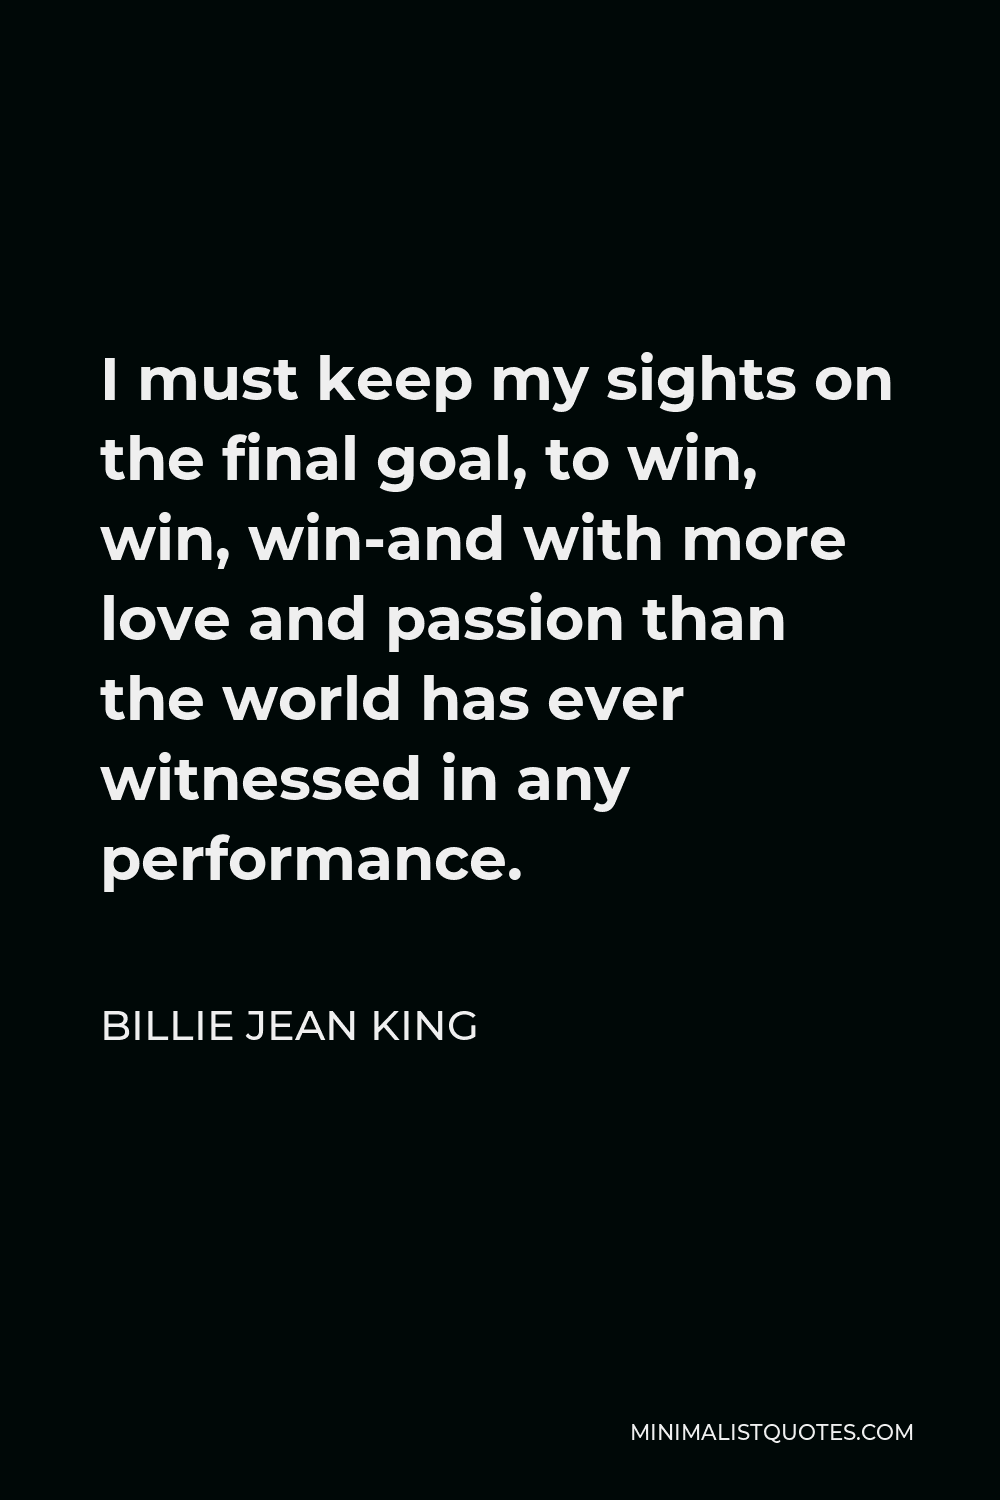 Billie Jean King Quote - I must keep my sights on the final goal, to win, win, win-and with more love and passion than the world has ever witnessed in any performance.